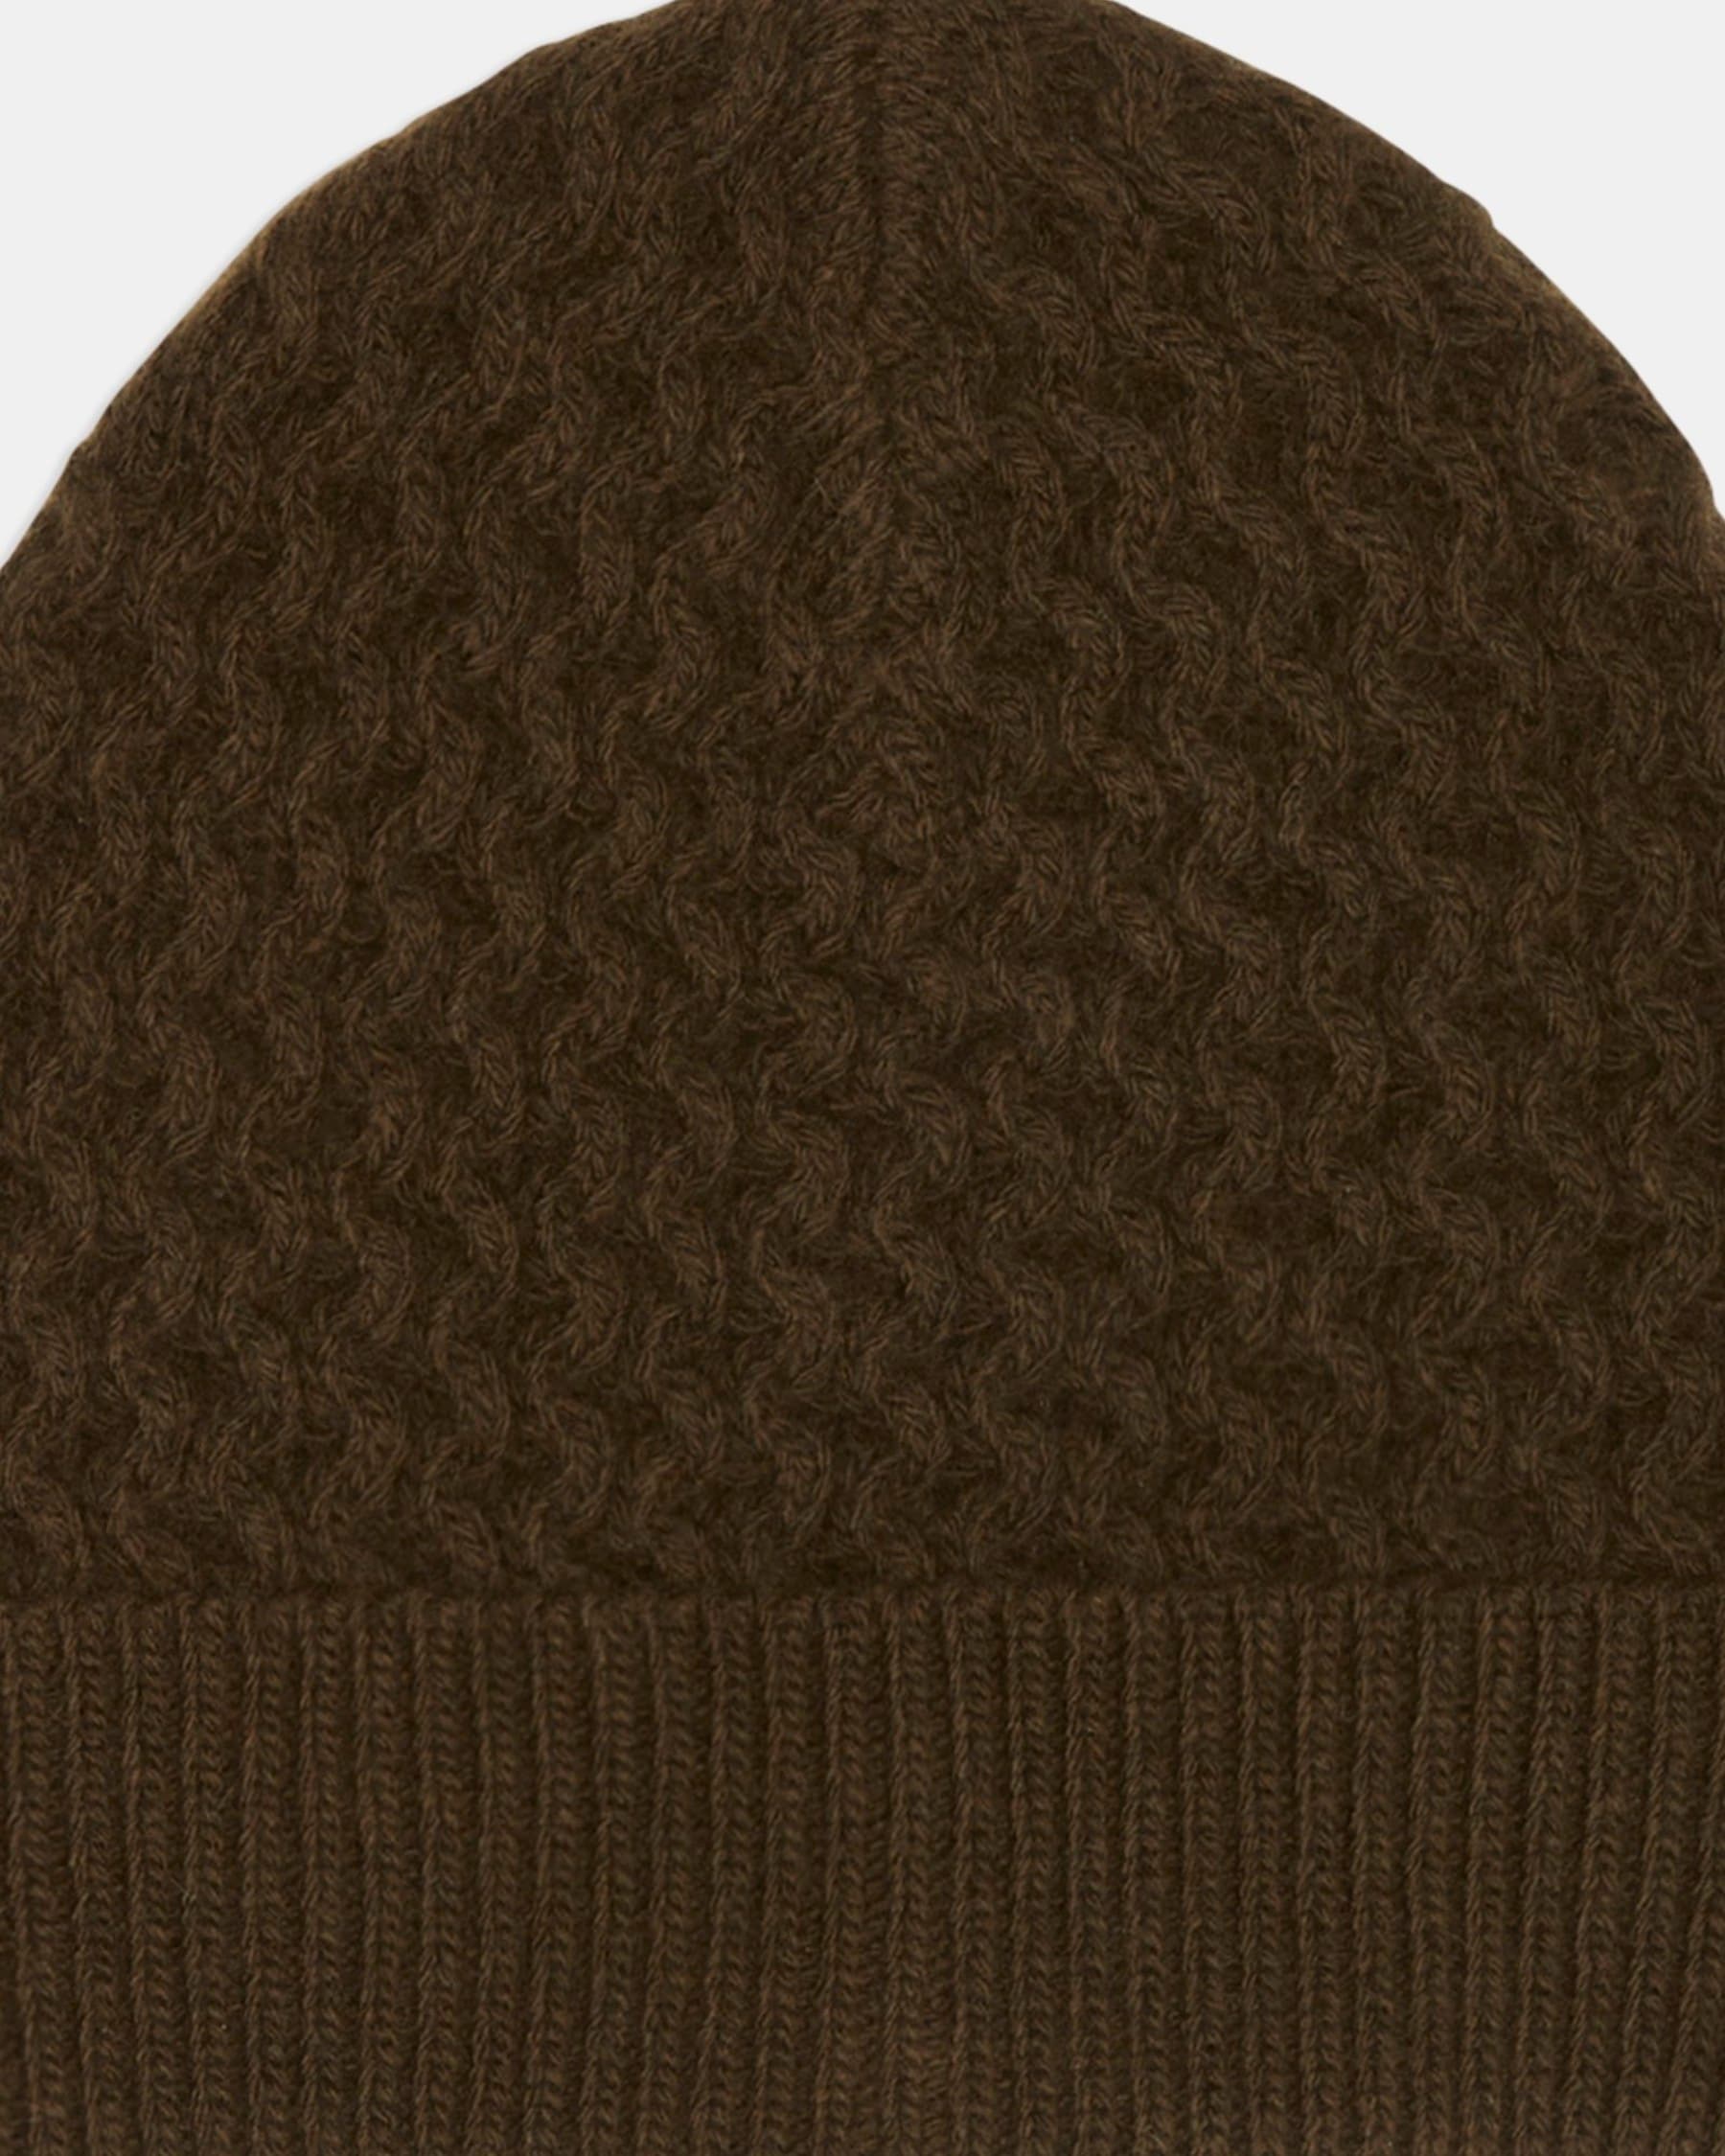 Honeycomb Hat in Felted Wool-Cashmere